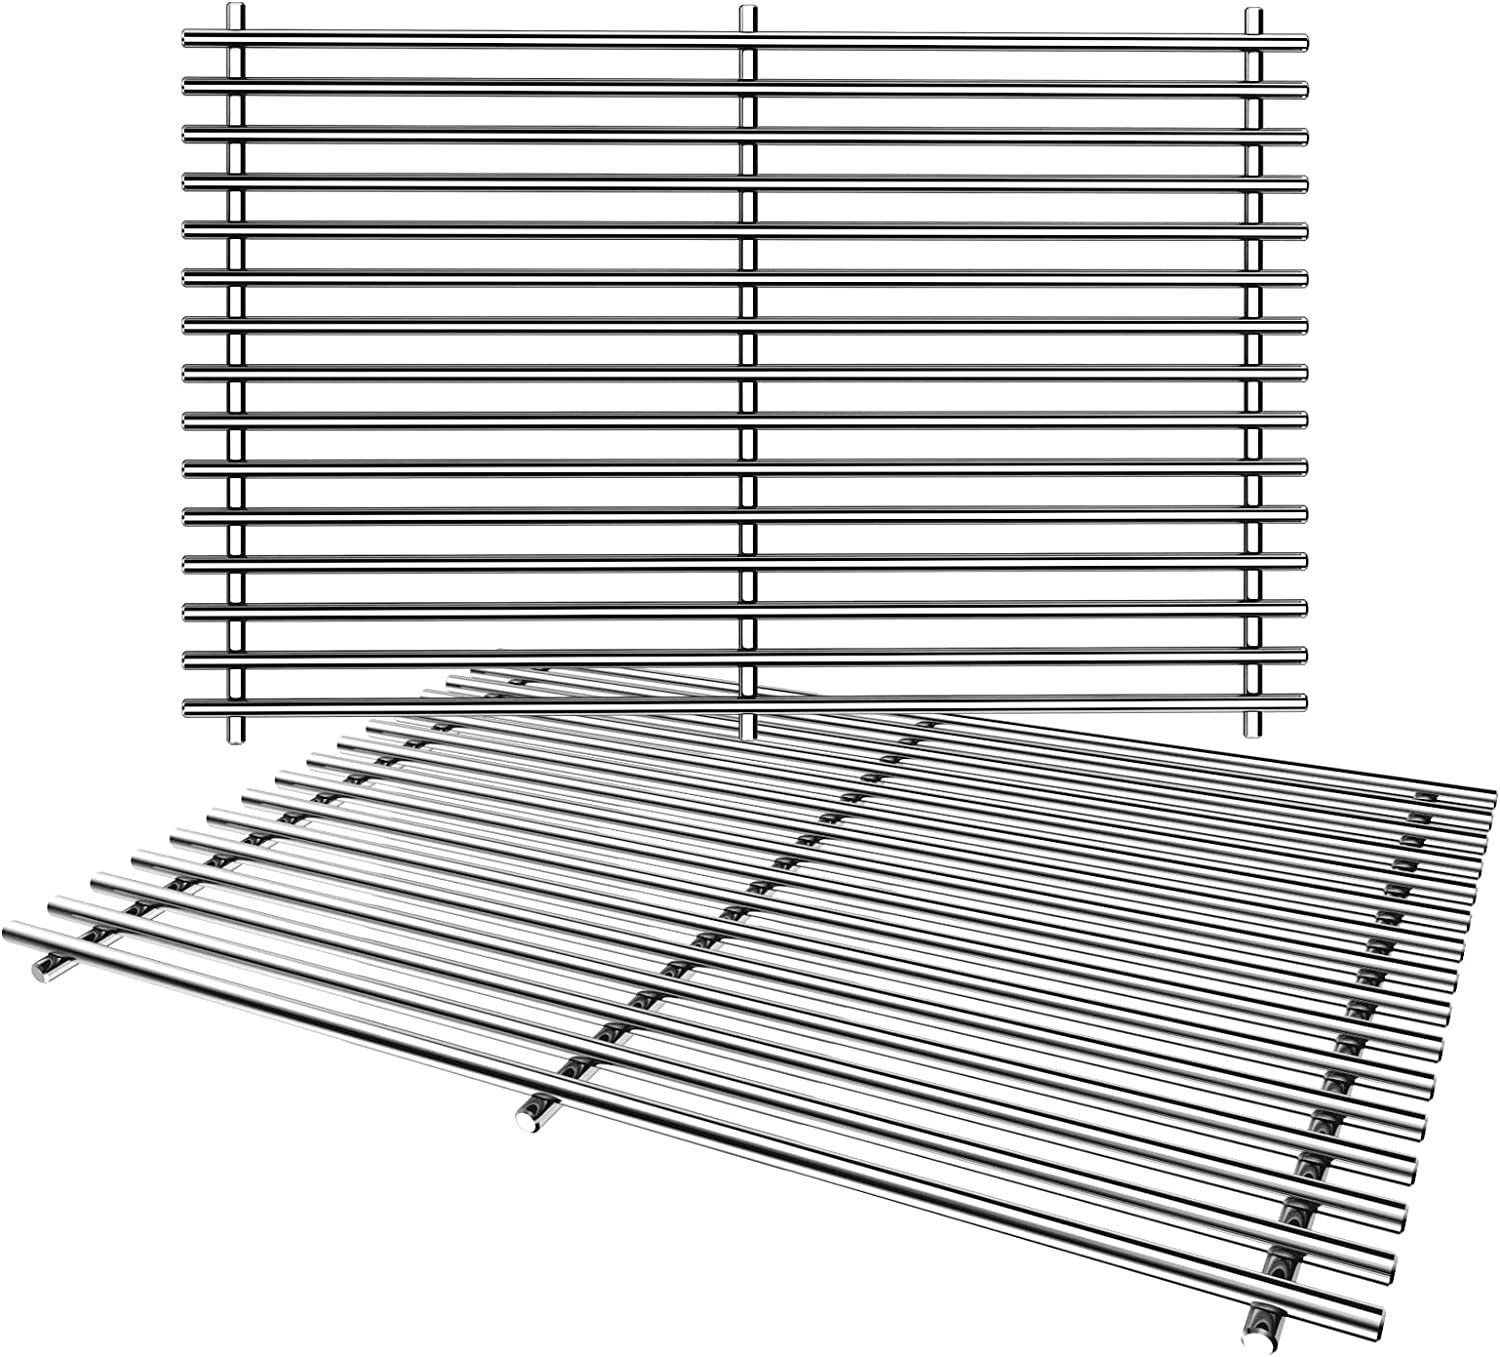 Grisun 7639 304 Stainless Steel Cooking Grates for Weber Spirit and Spirit II 300 Series Spirit E-310 E-330 E/S320 Genesis Silver/Gold B & C Genesis Platinum B & C Grill Replacement Part Grates 17.3" - image 1 of 13